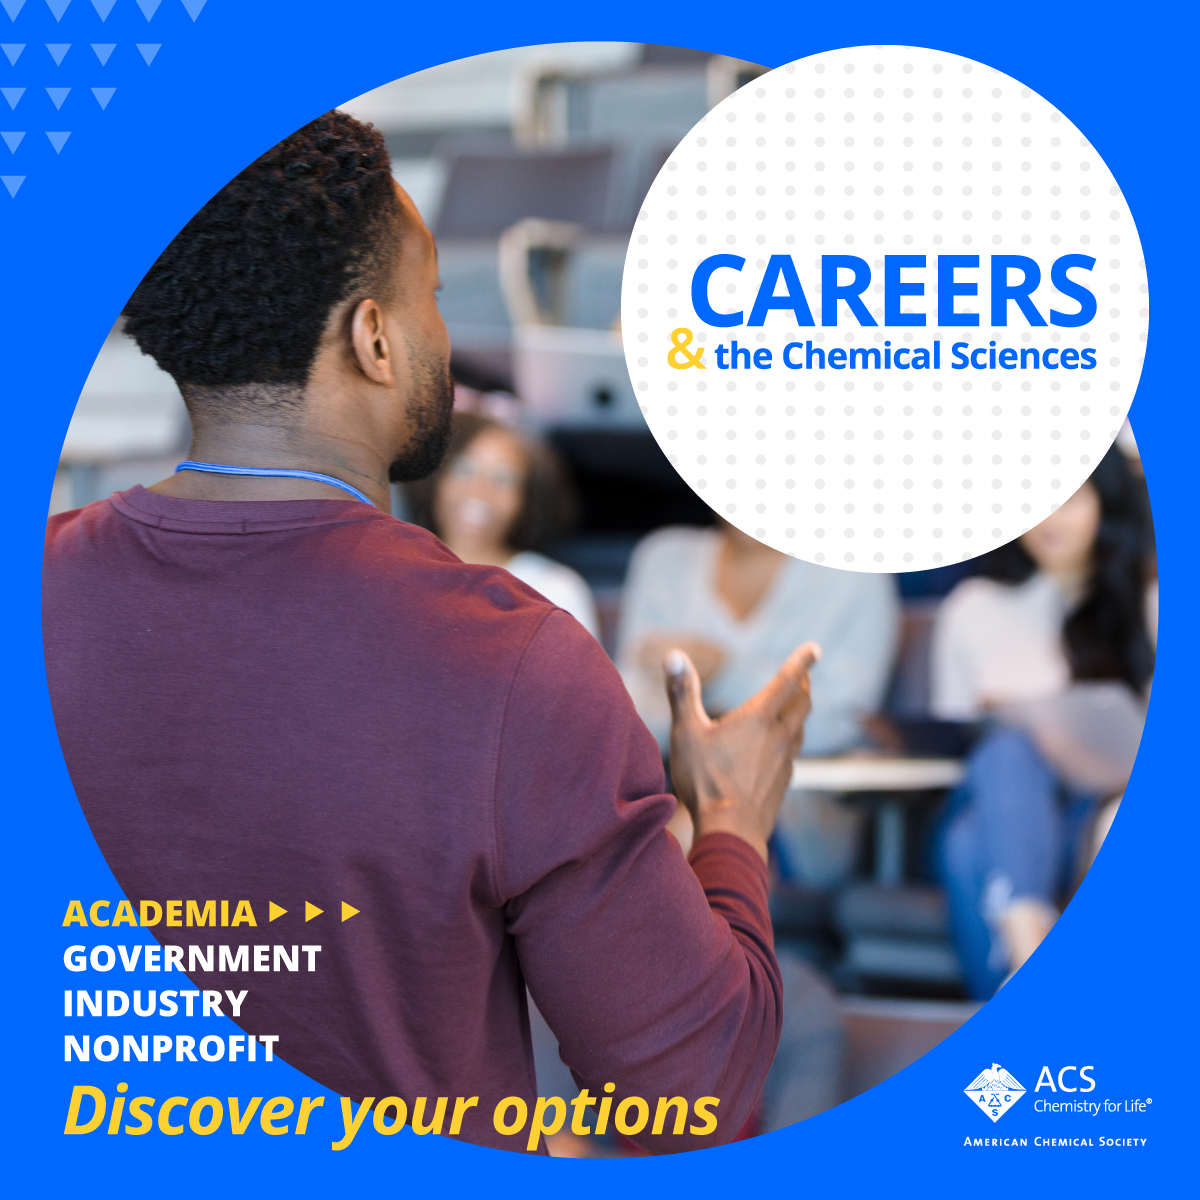 Explore Career Options in the Chemical Sciences